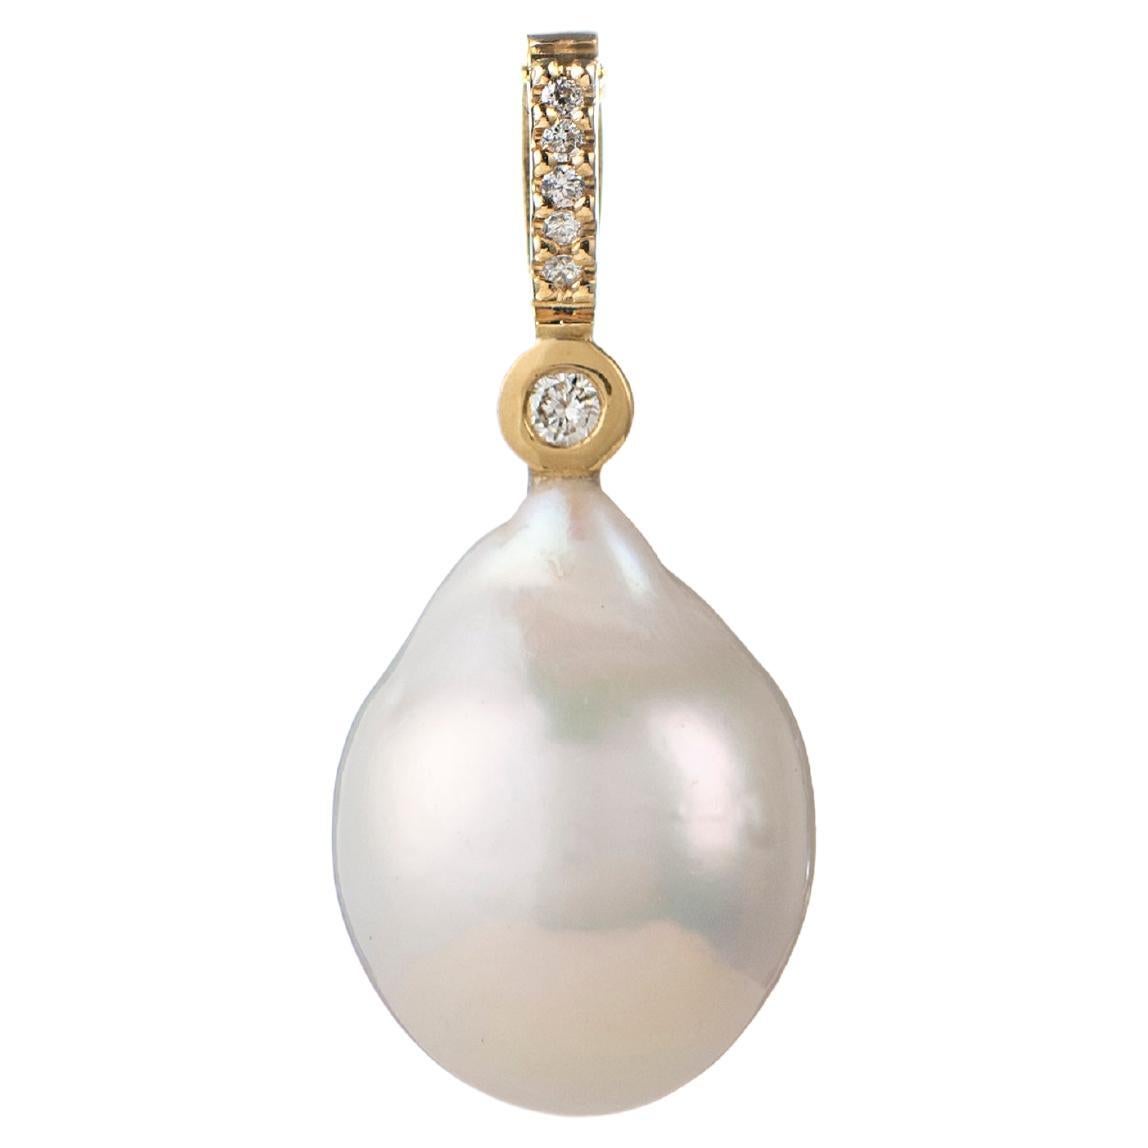 Baroque pearl charm with diamonds, 18K Gold